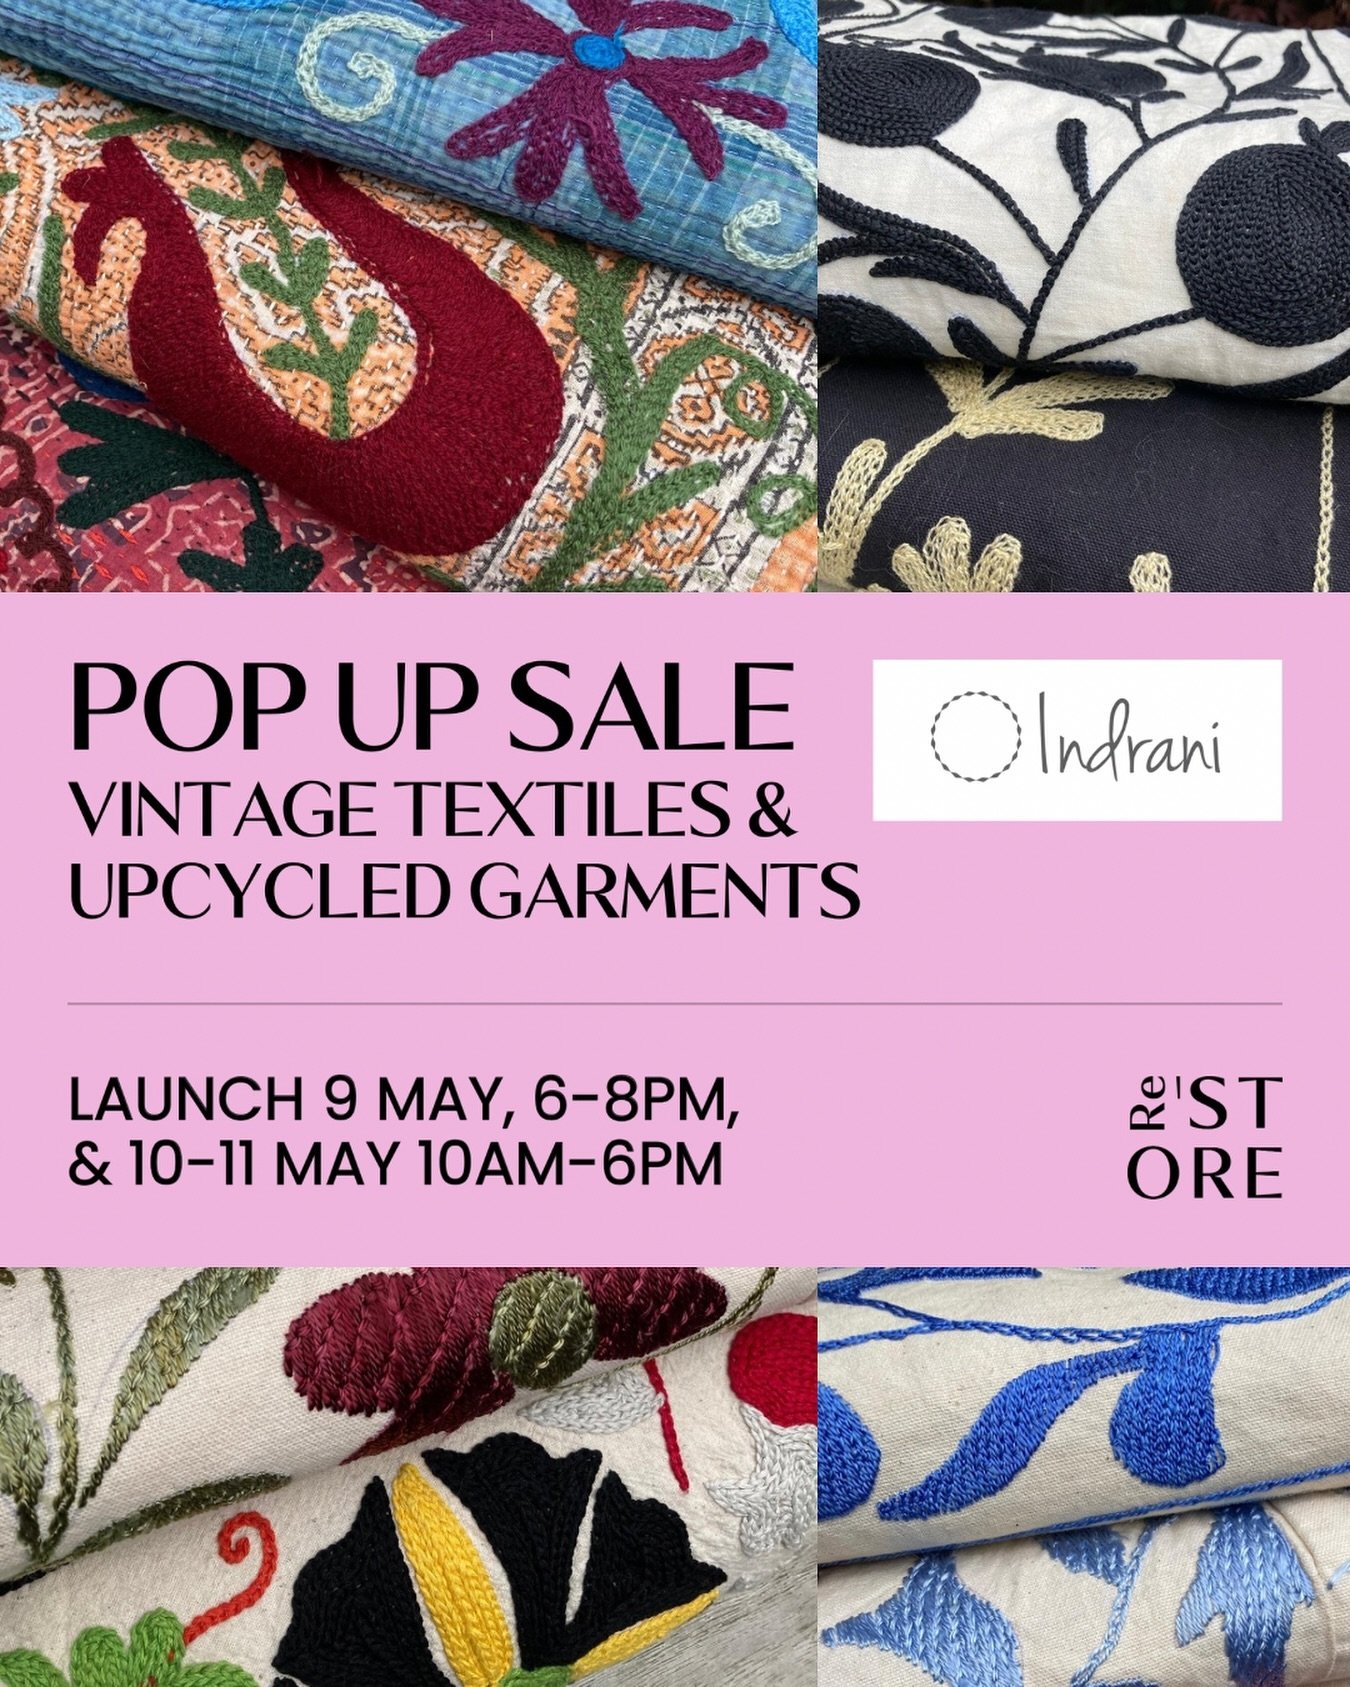 Introducing our next Responsible Retail pop up with @shop.indrani selling vintage textiles including kanthas, suzani&rsquo;s and hand block print cotton perfect for you to rework into new designs or to use as throws. There will also be a selection of